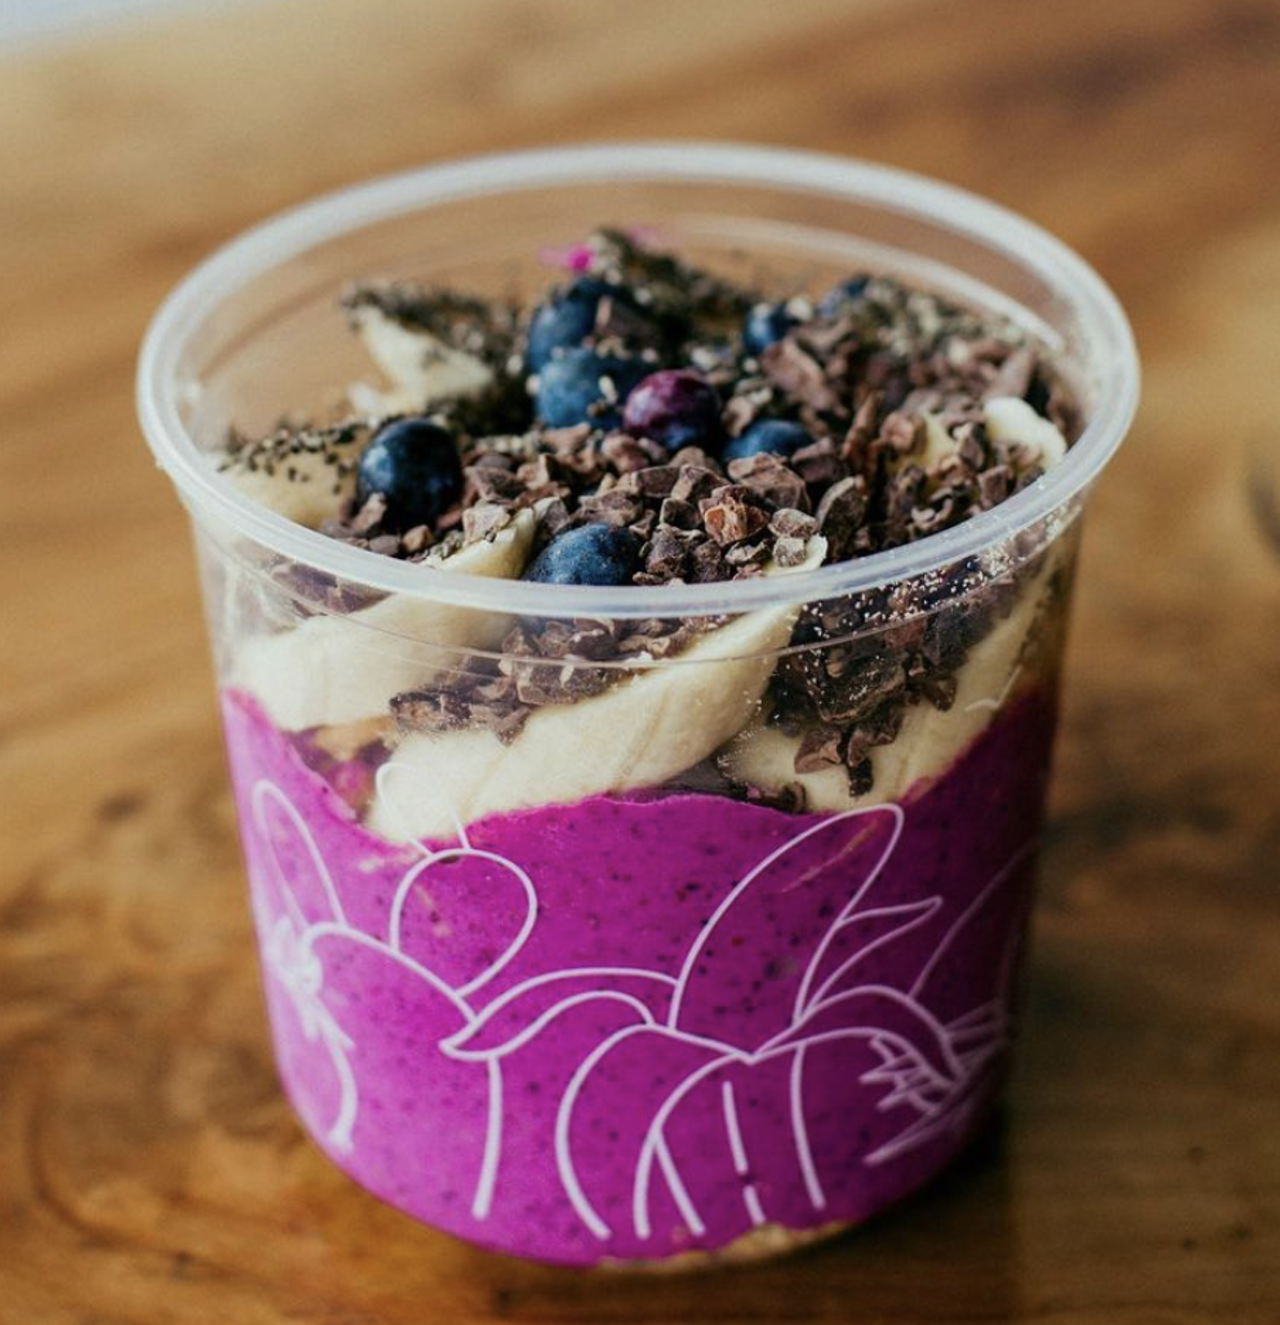 Rise Up Acai Bowls
Multiple Locations riseupsatx.com
Rising to the occasion, Rise Up offers handcrafted Acai bowls, smoothies and more. Their flavorful fruit combinations will leave you feeling fresh and ready for the day without compromising any resolutions along the way. 
Photo via Instagram / riseupsatx